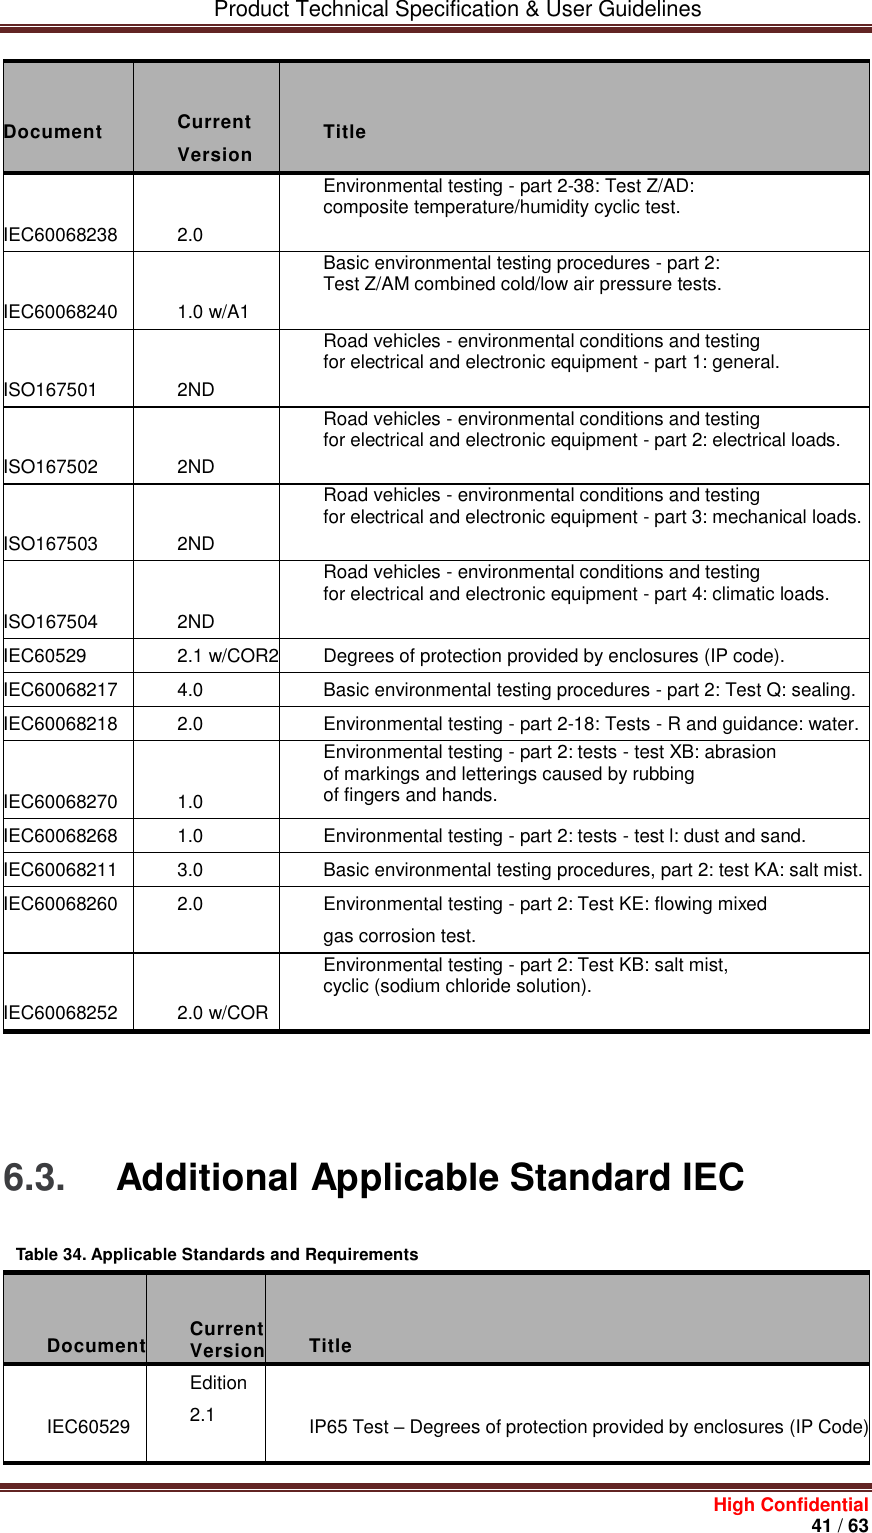         Product Technical Specification &amp; User Guidelines     High Confidential       41 / 63   Document  Current Version  Title  IEC60068238  2.0 Environmental testing - part 2-38: Test Z/AD: composite temperature/humidity cyclic test.  IEC60068240  1.0 w/A1 Basic environmental testing procedures - part 2: Test Z/AM combined cold/low air pressure tests.  ISO167501  2ND Road vehicles - environmental conditions and testing for electrical and electronic equipment - part 1: general.  ISO167502  2ND Road vehicles - environmental conditions and testing for electrical and electronic equipment - part 2: electrical loads.  ISO167503  2ND Road vehicles - environmental conditions and testing for electrical and electronic equipment - part 3: mechanical loads.  ISO167504  2ND Road vehicles - environmental conditions and testing for electrical and electronic equipment - part 4: climatic loads. IEC60529 2.1 w/COR2 Degrees of protection provided by enclosures (IP code). IEC60068217 4.0 Basic environmental testing procedures - part 2: Test Q: sealing. IEC60068218 2.0 Environmental testing - part 2-18: Tests - R and guidance: water.  IEC60068270  1.0 Environmental testing - part 2: tests - test XB: abrasion of markings and letterings caused by rubbing of fingers and hands. IEC60068268 1.0 Environmental testing - part 2: tests - test l: dust and sand. IEC60068211 3.0 Basic environmental testing procedures, part 2: test KA: salt mist. IEC60068260 2.0 Environmental testing - part 2: Test KE: flowing mixed gas corrosion test.  IEC60068252  2.0 w/COR Environmental testing - part 2: Test KB: salt mist, cyclic (sodium chloride solution).        6.3.  Additional Applicable Standard IEC  Table 34. Applicable Standards and Requirements  Document  Current Version  Title  IEC60529 Edition 2.1  IP65 Test – Degrees of protection provided by enclosures (IP Code) 